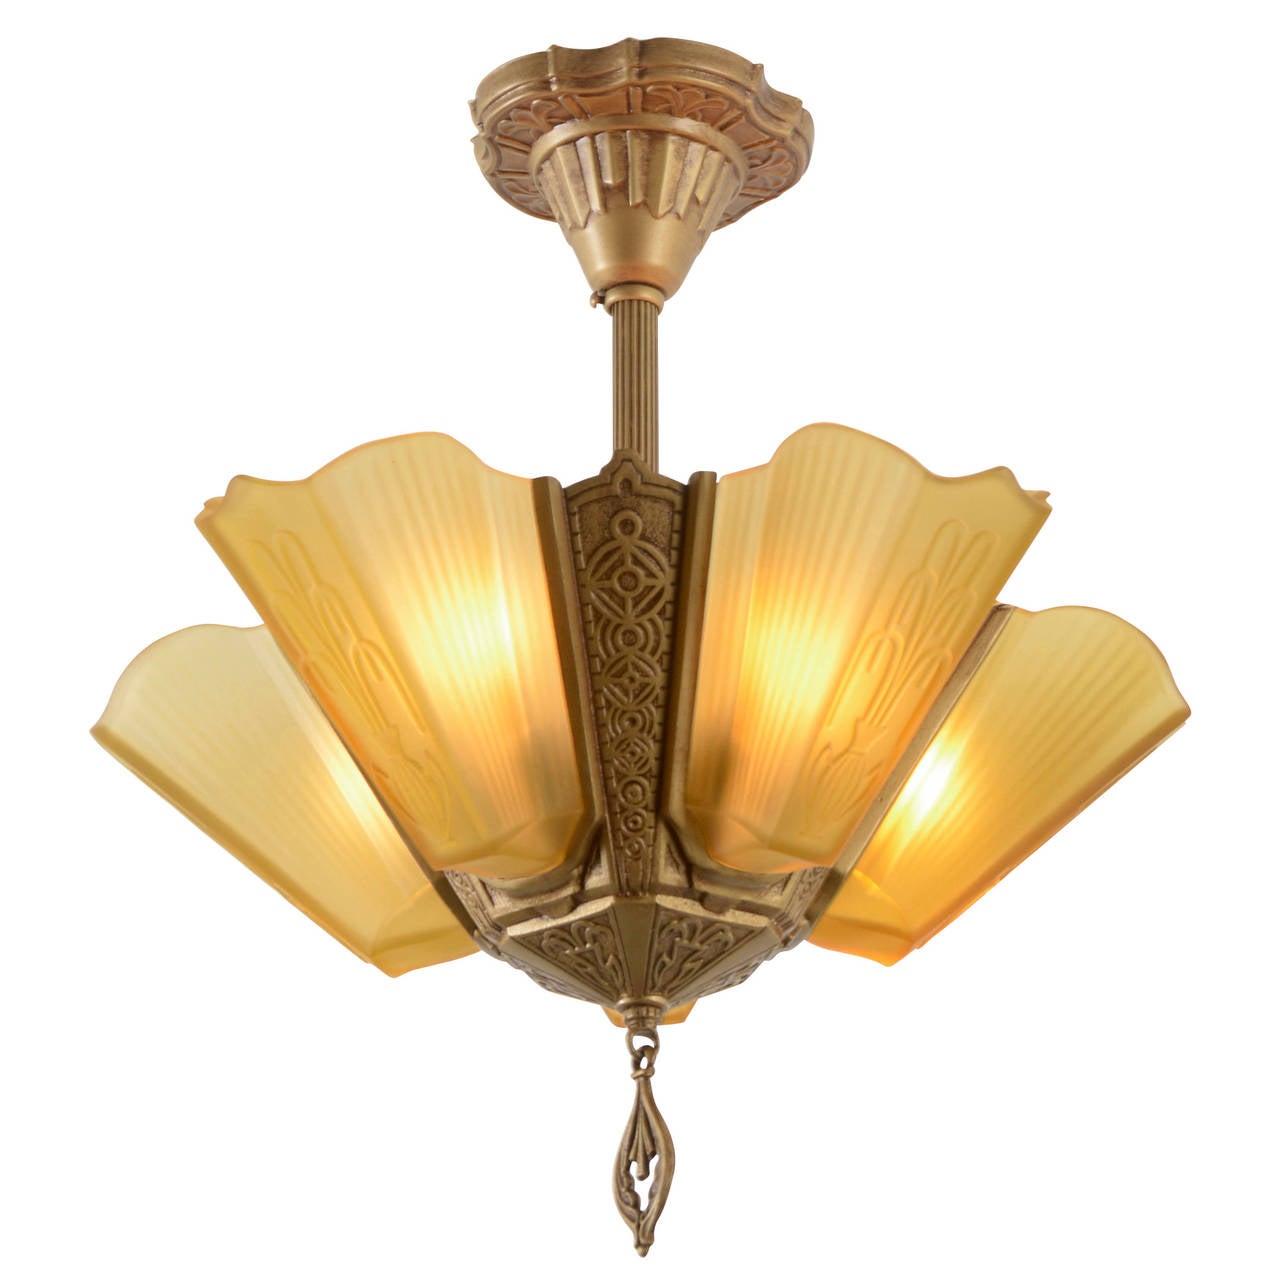 Slipper shaded lights like this antique chandelier were the hot trend from circa 1930 through 1935, before Streamline style and cup shade fixtures moved center stage. Inspired by French examples and featuring glass slipper shades at each light bulb